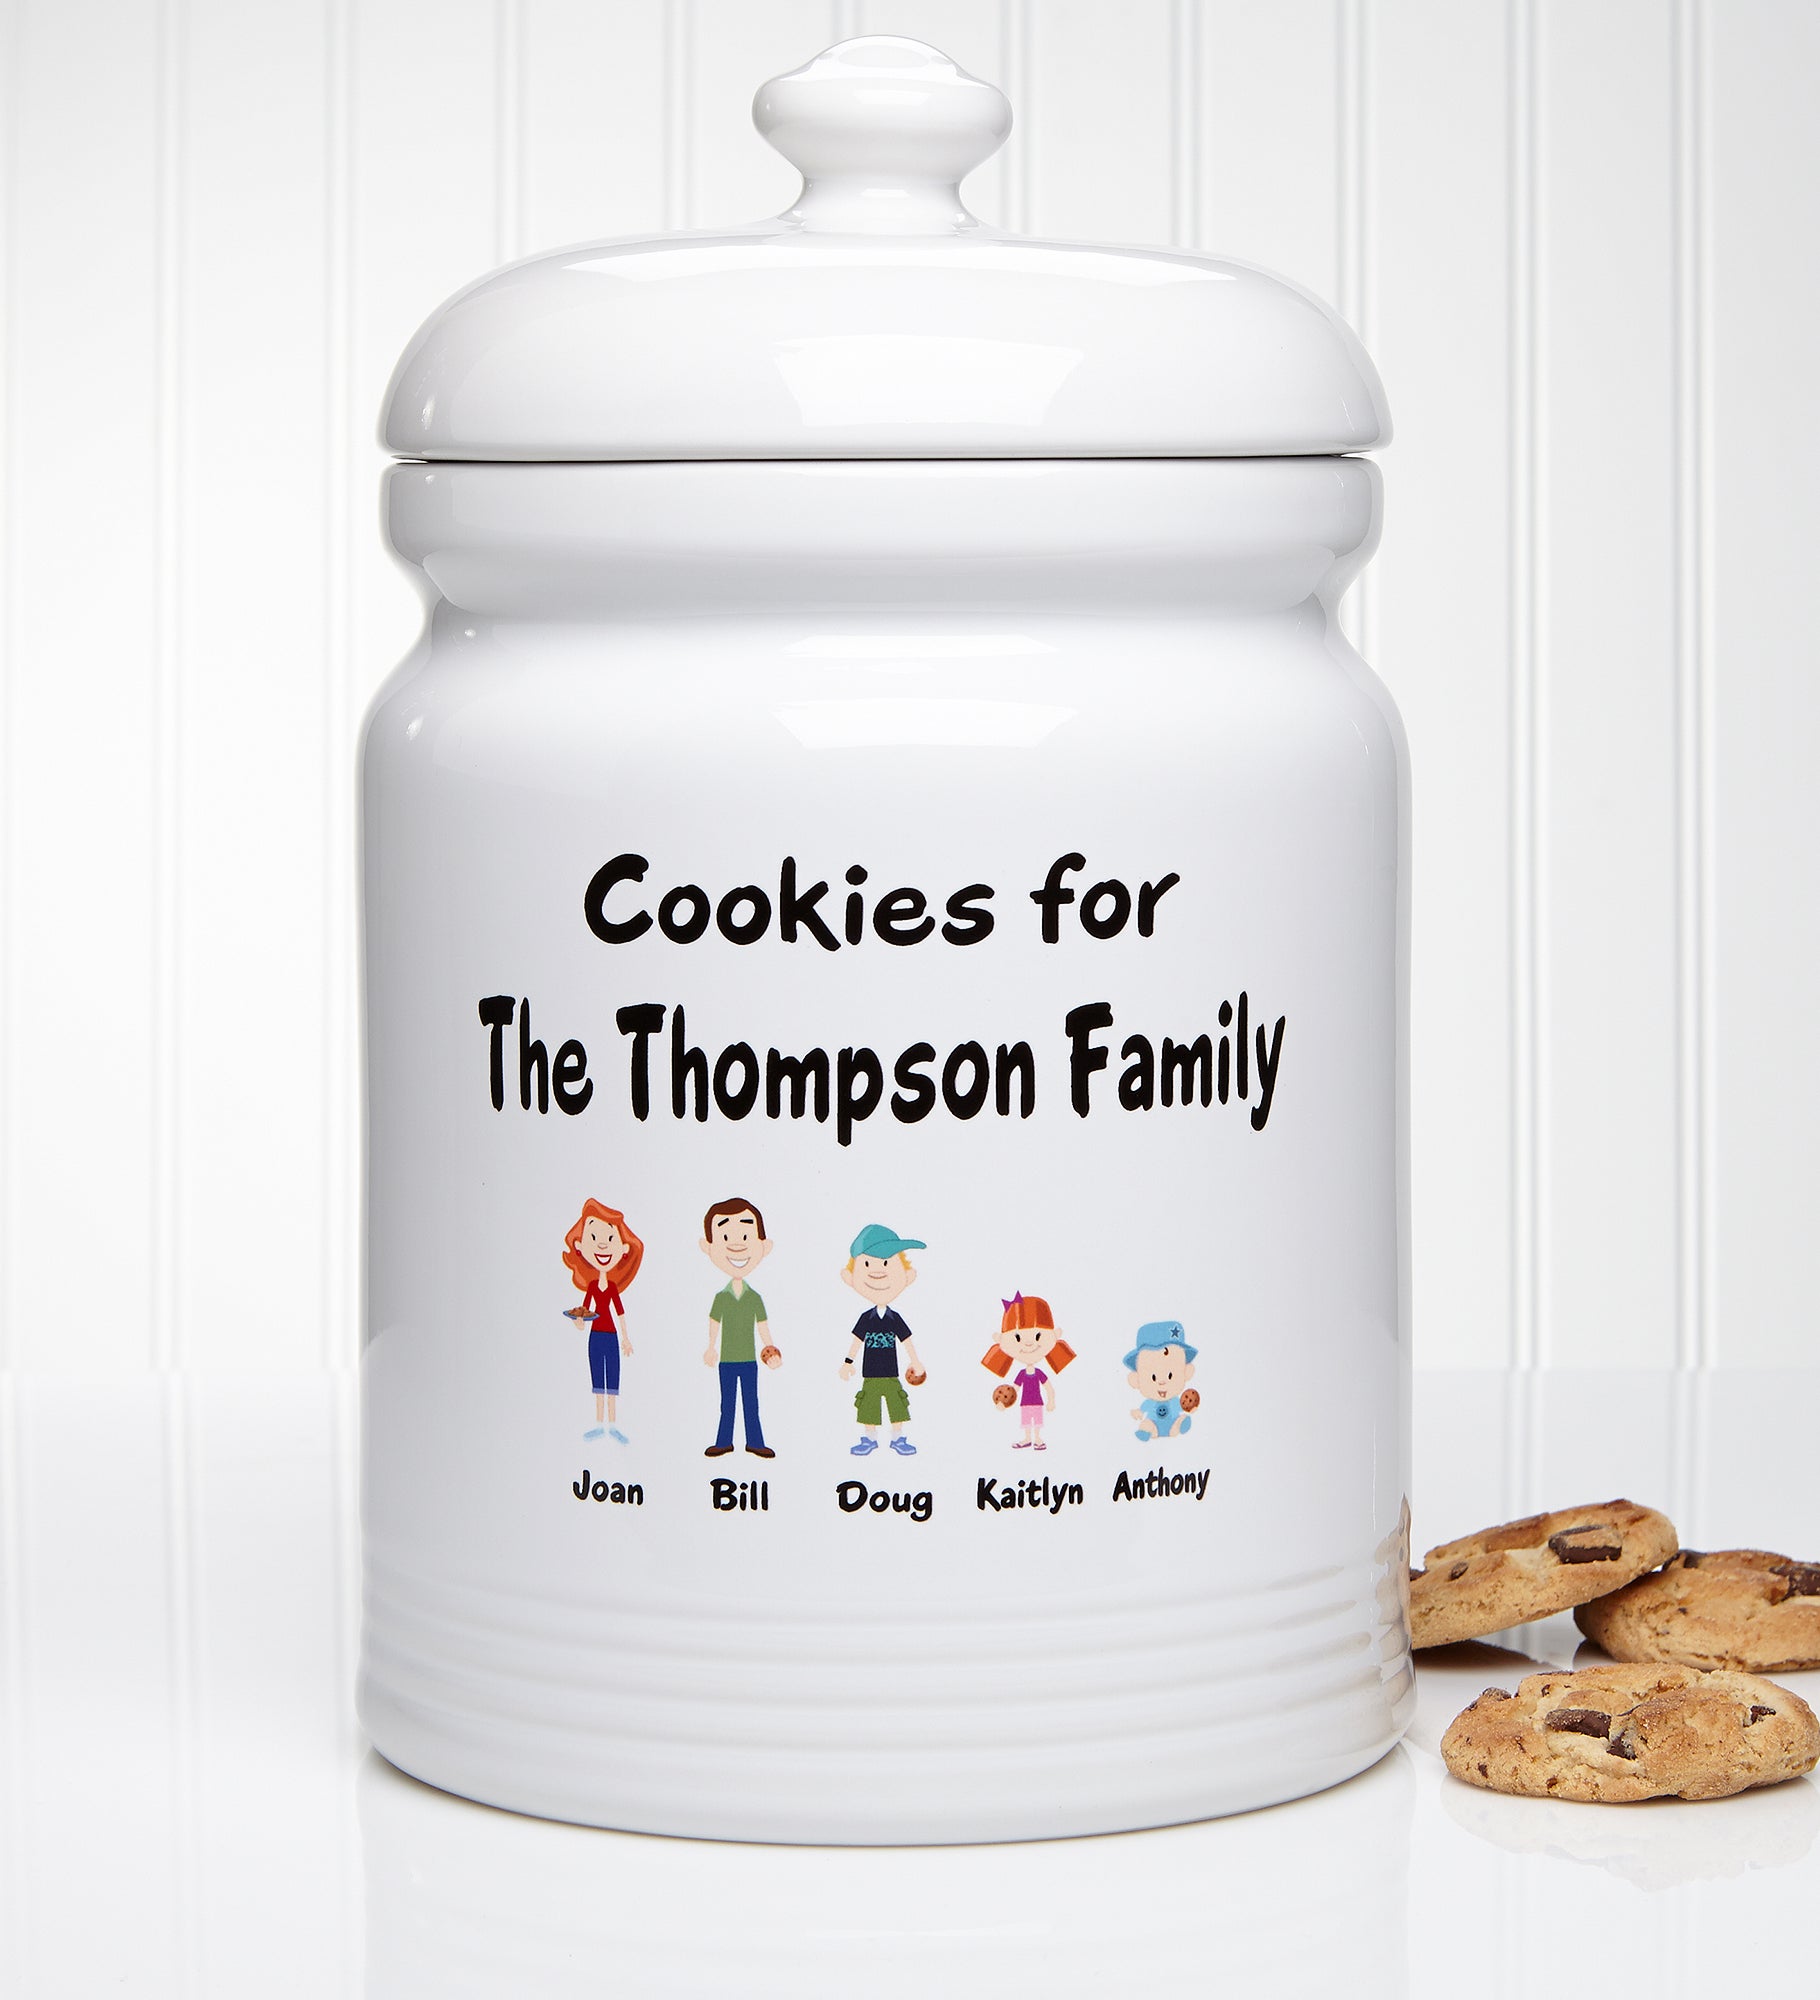 Our Family Characters Personalized Cookie Jar